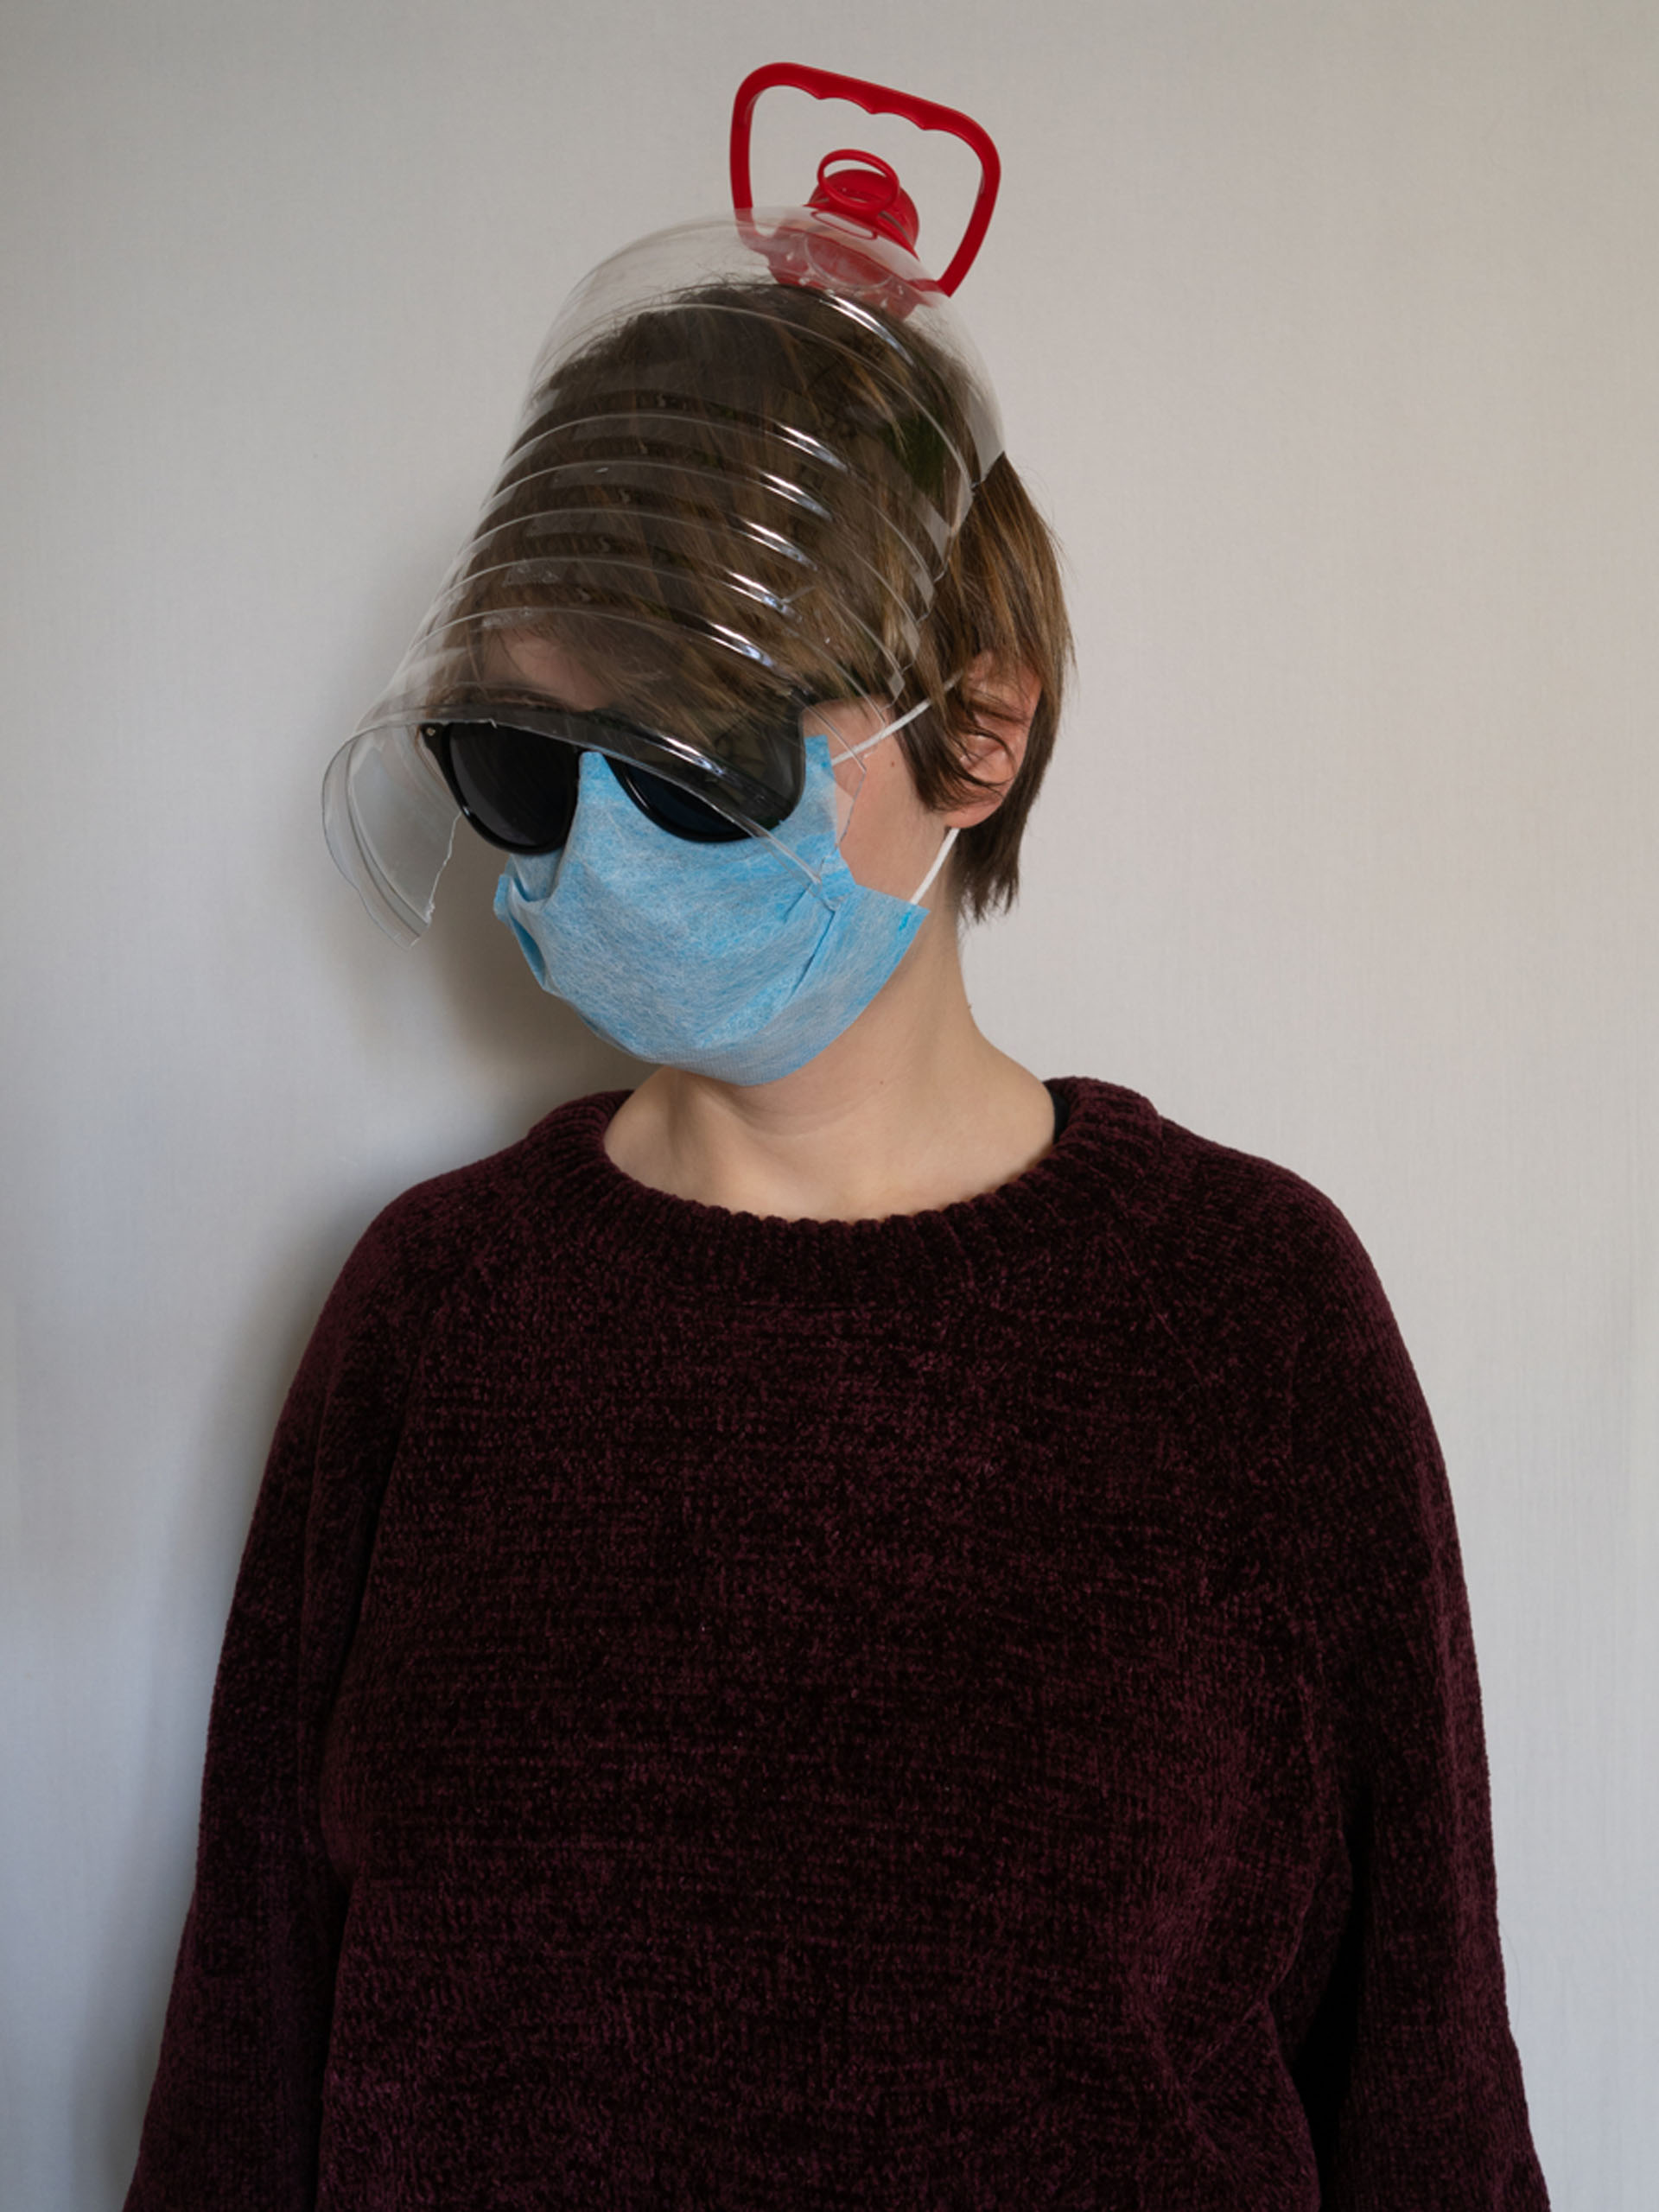 On the first week of the coronavirus outbreak, I saw images of people wearing plastic bottles instead of medical masks. I decided to make my own and add sunglasses — to protect my eyes from the infection.